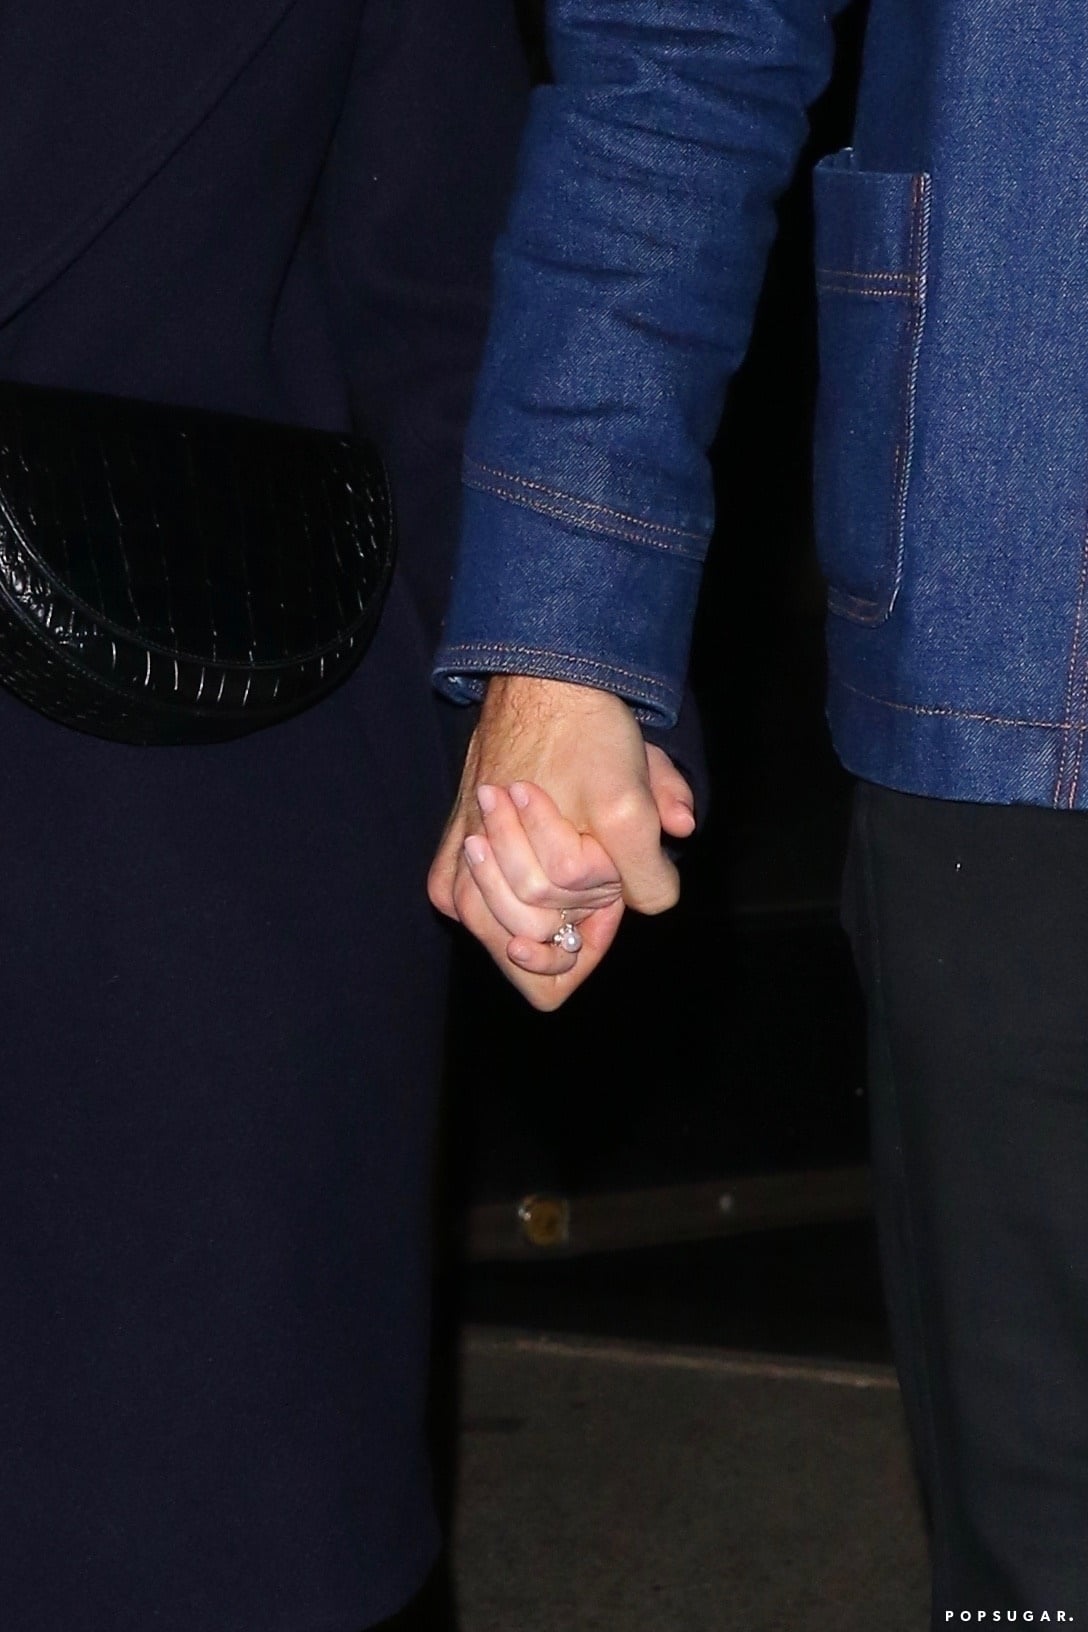 See Emma Stone's Unique Pearl Engagement Ring